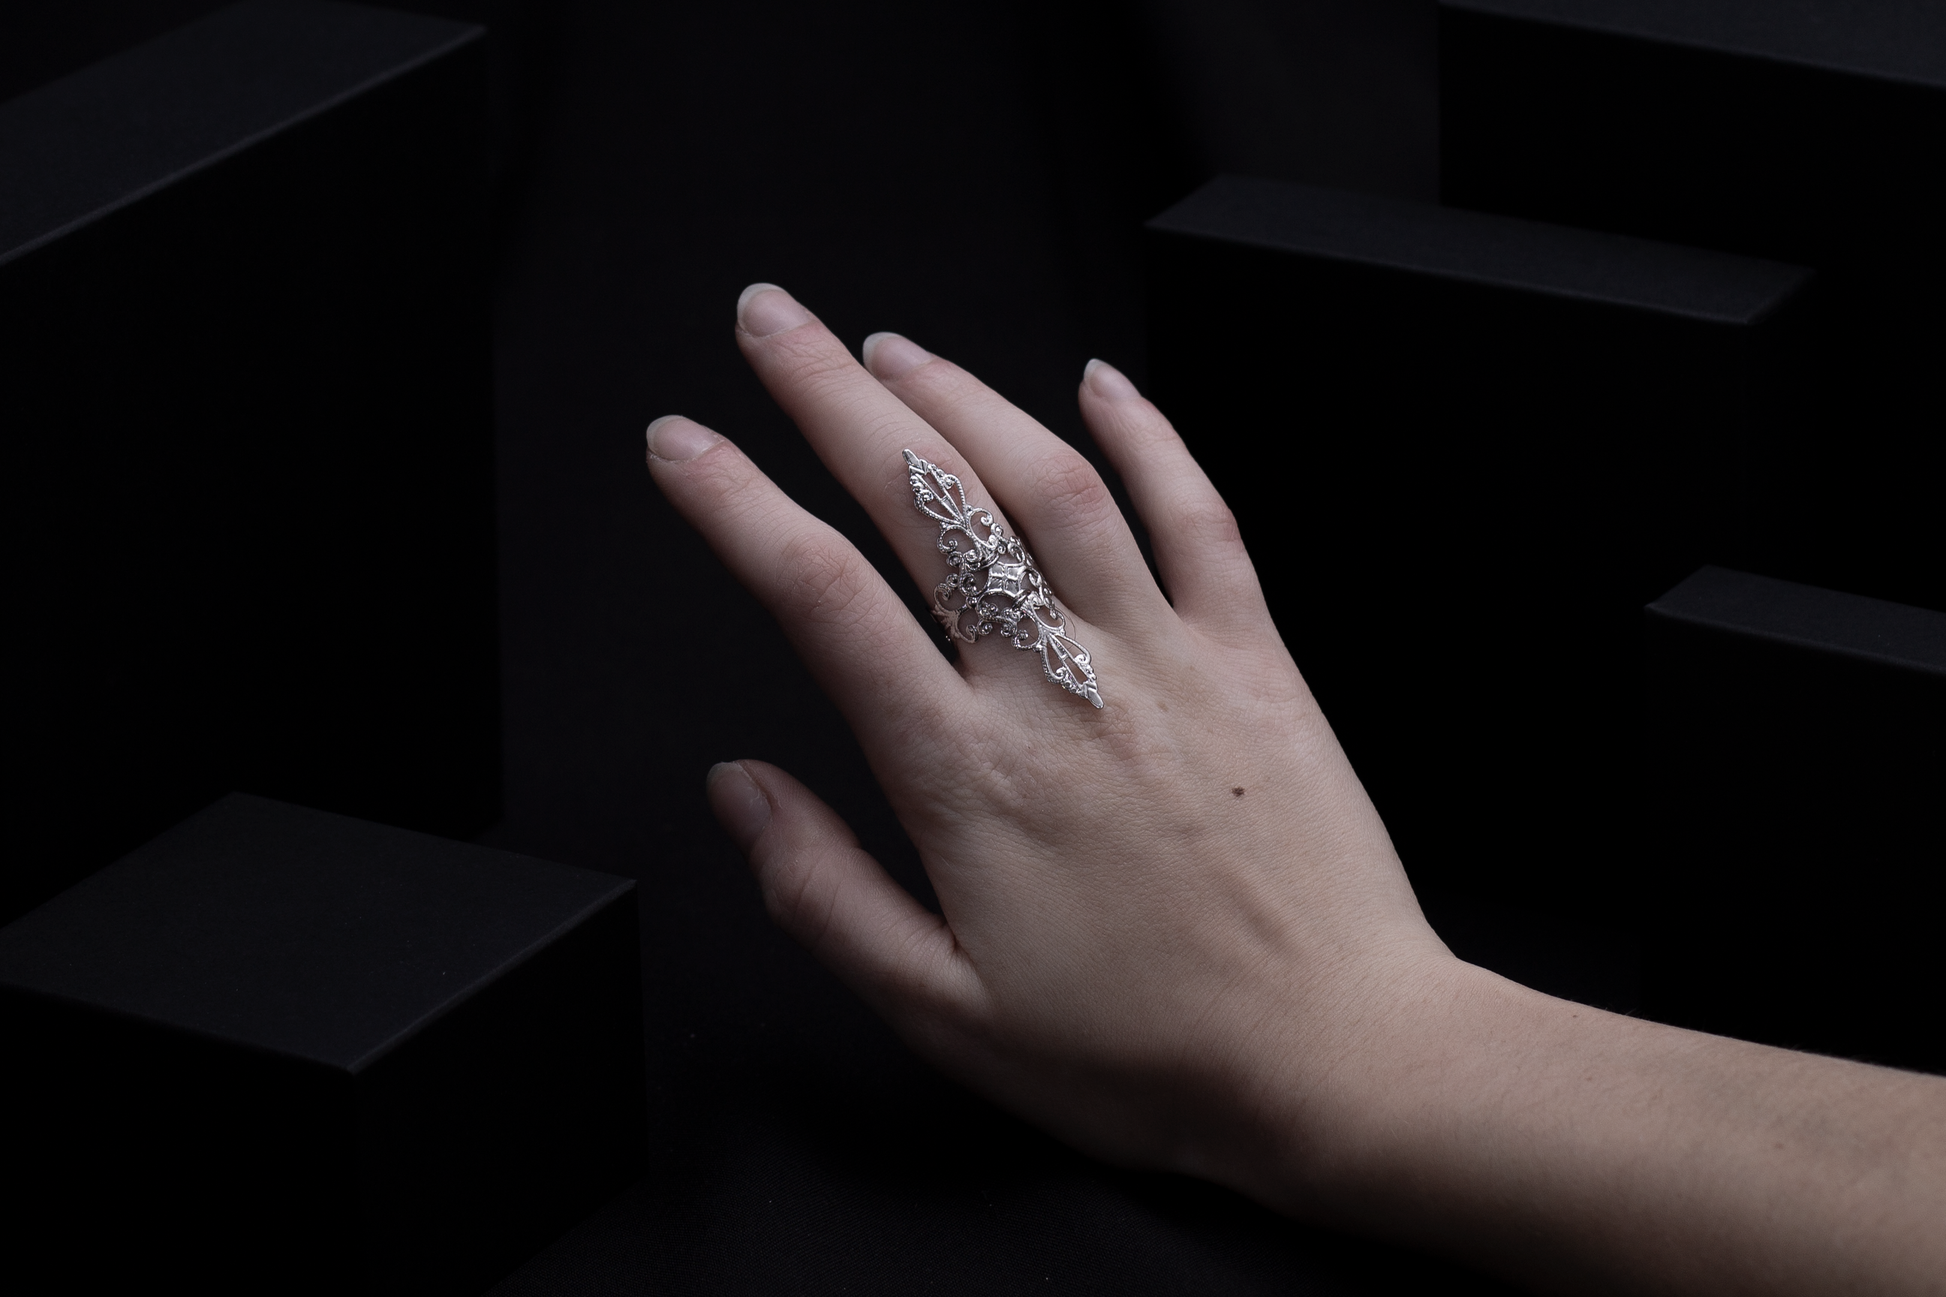 A woman's hand elegantly displaying a silver filigree full-finger ring against a dark background with geometric shapes, embodying a sophisticated gothic style.